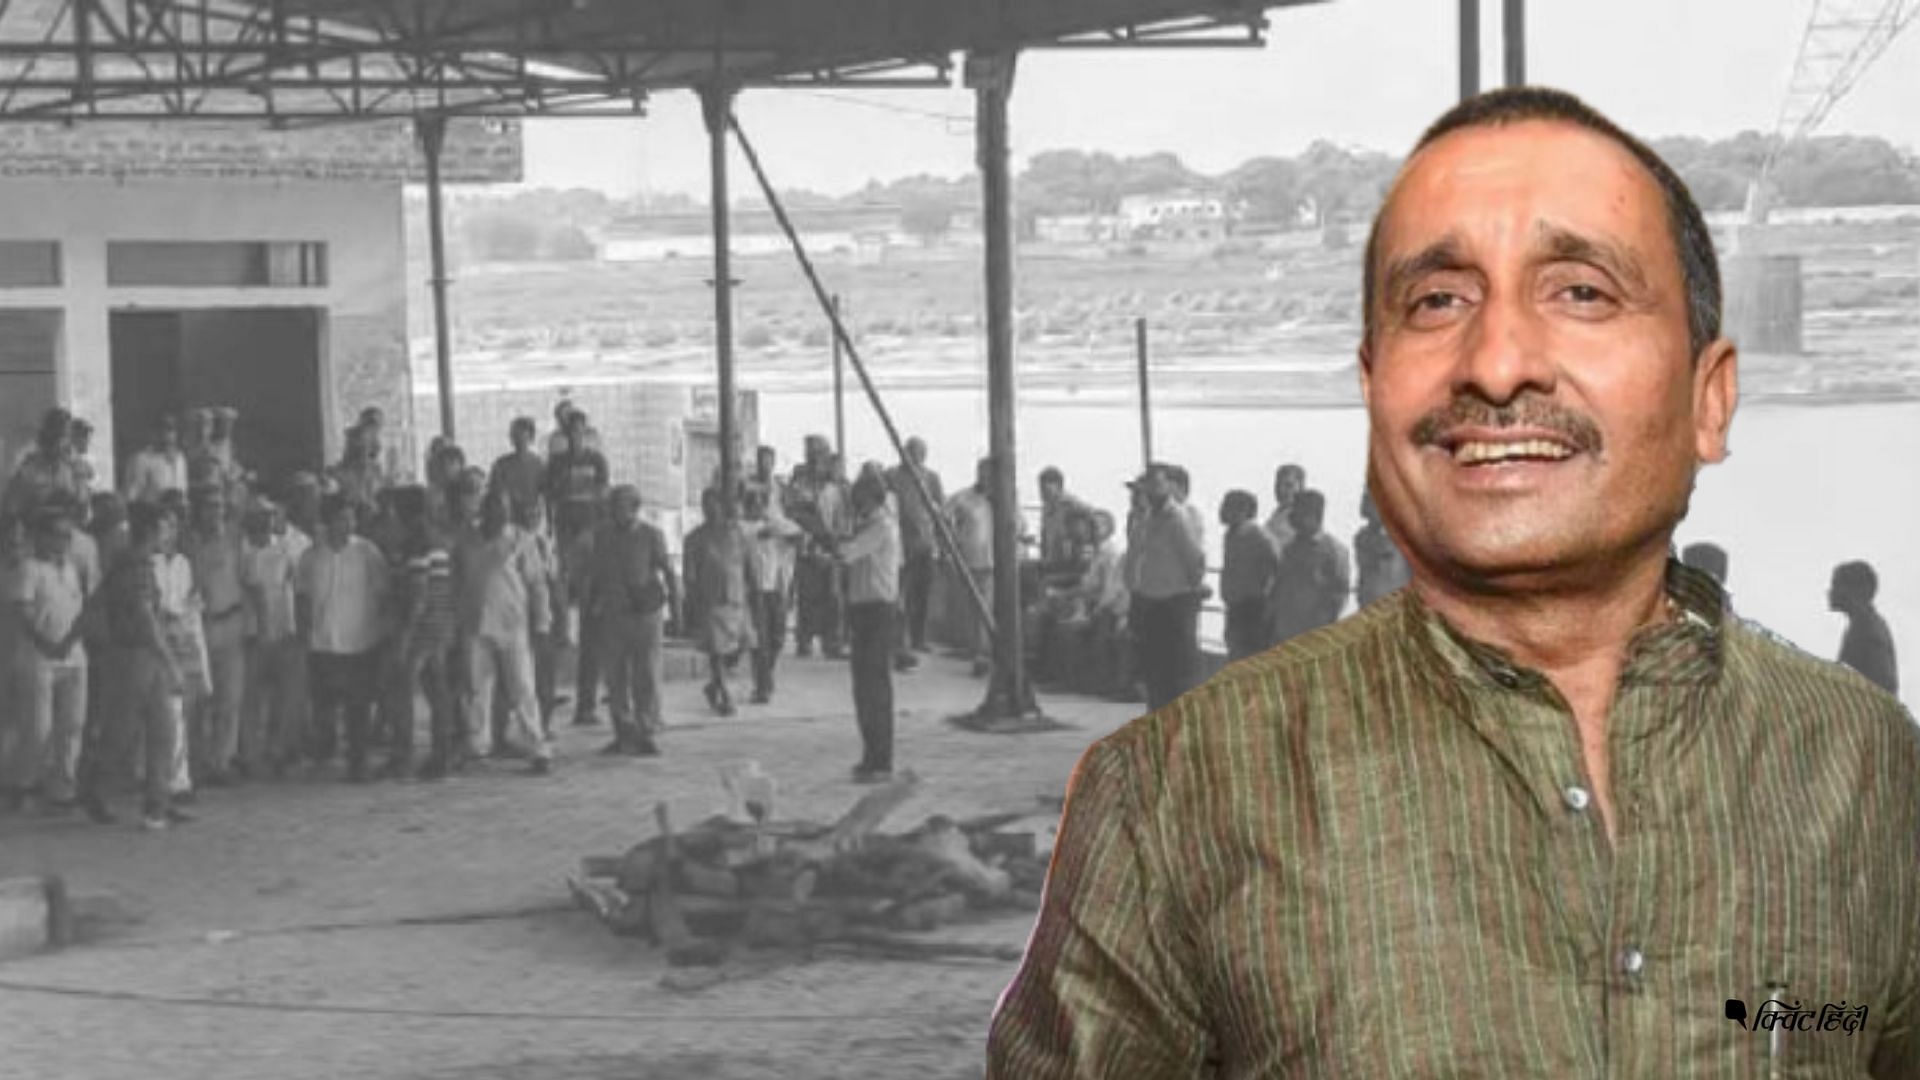 Now expelled BJP MLA Kuldeep Sengar was arrested on charges of rape in April 2018, but the BJP disclosed on 30 July 2019, which is fourteen months later, that he was suspended ‘a long time ago.’ The exact date of Sengar’s suspension continues to not be revealed. 